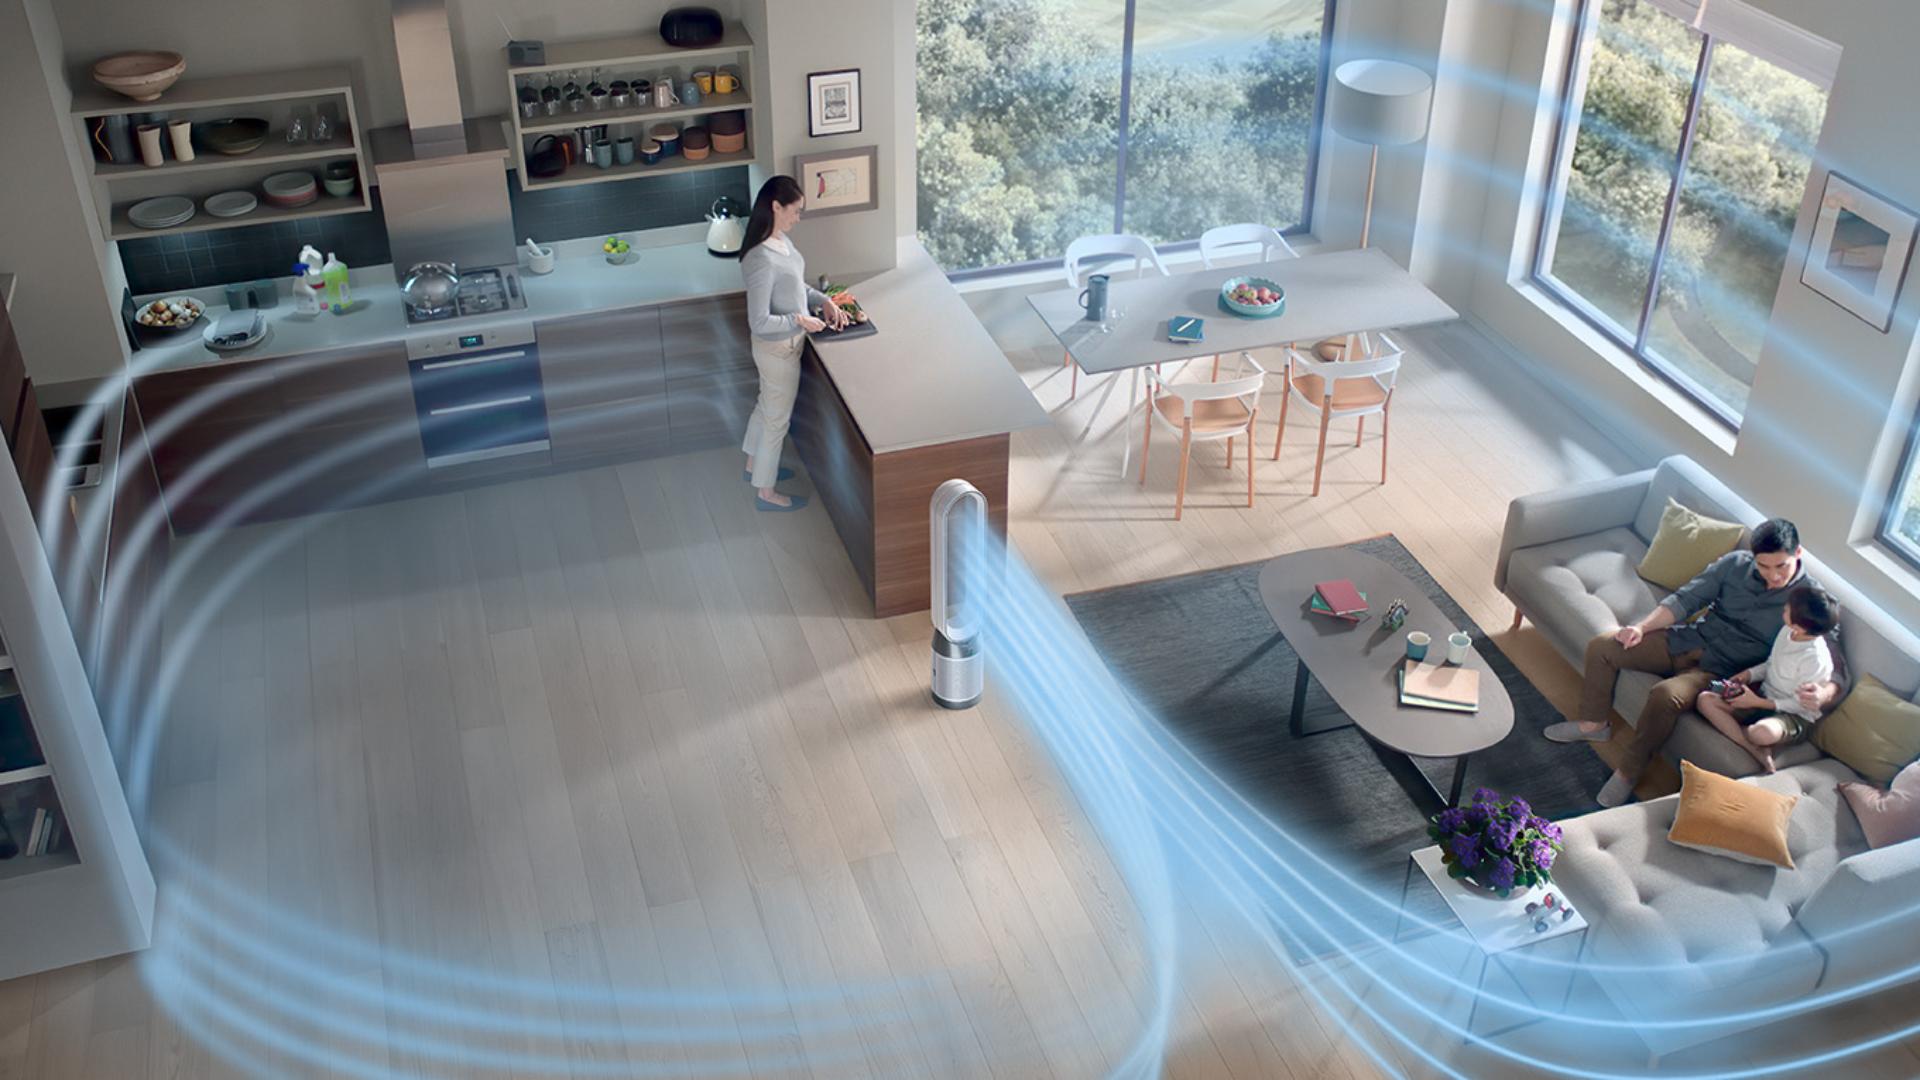 The airflow of a Dyson purifier purifying the whole room.